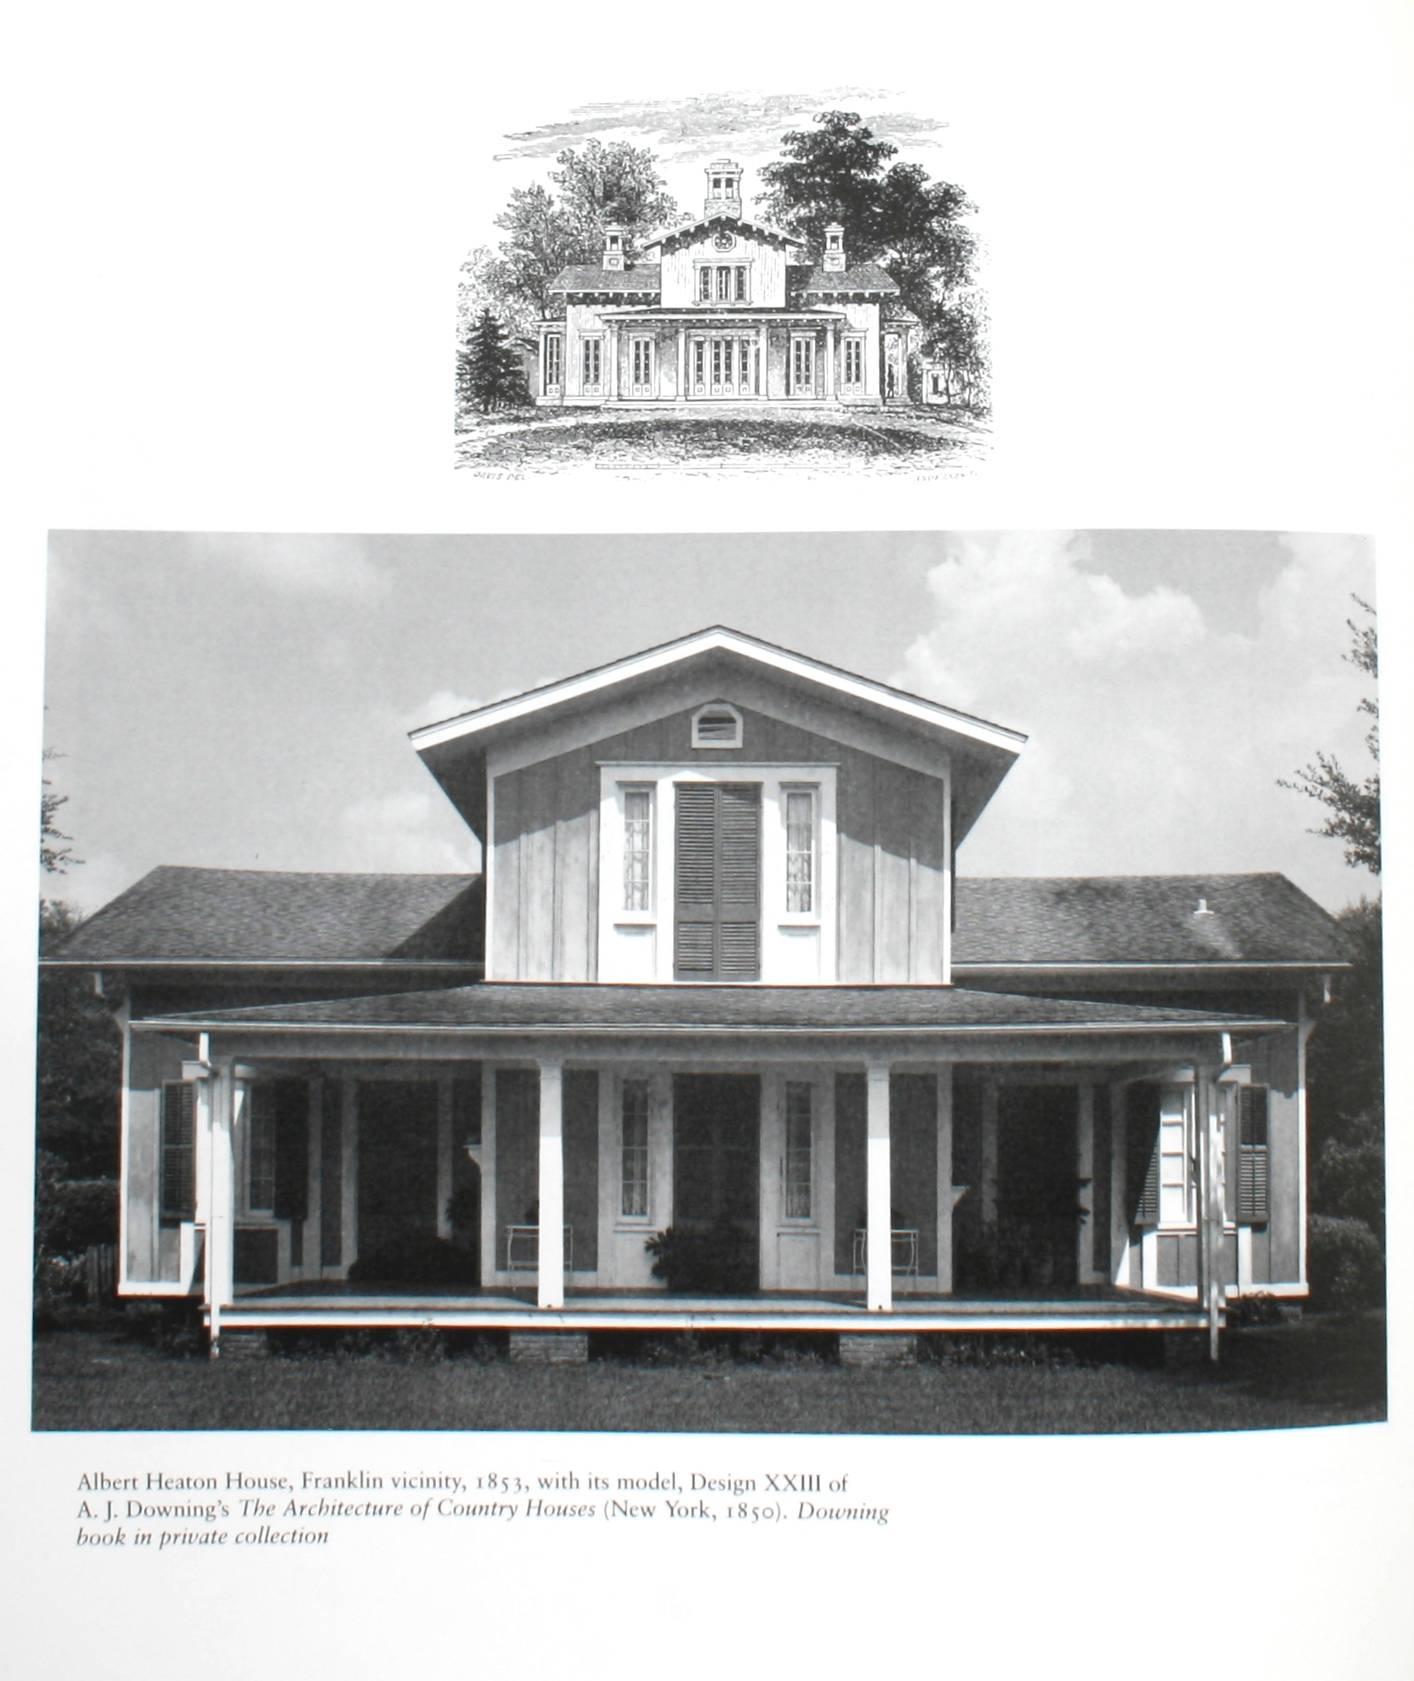 Paper Architecture of the Old South: Louisiana by Mills Lane, First Edition